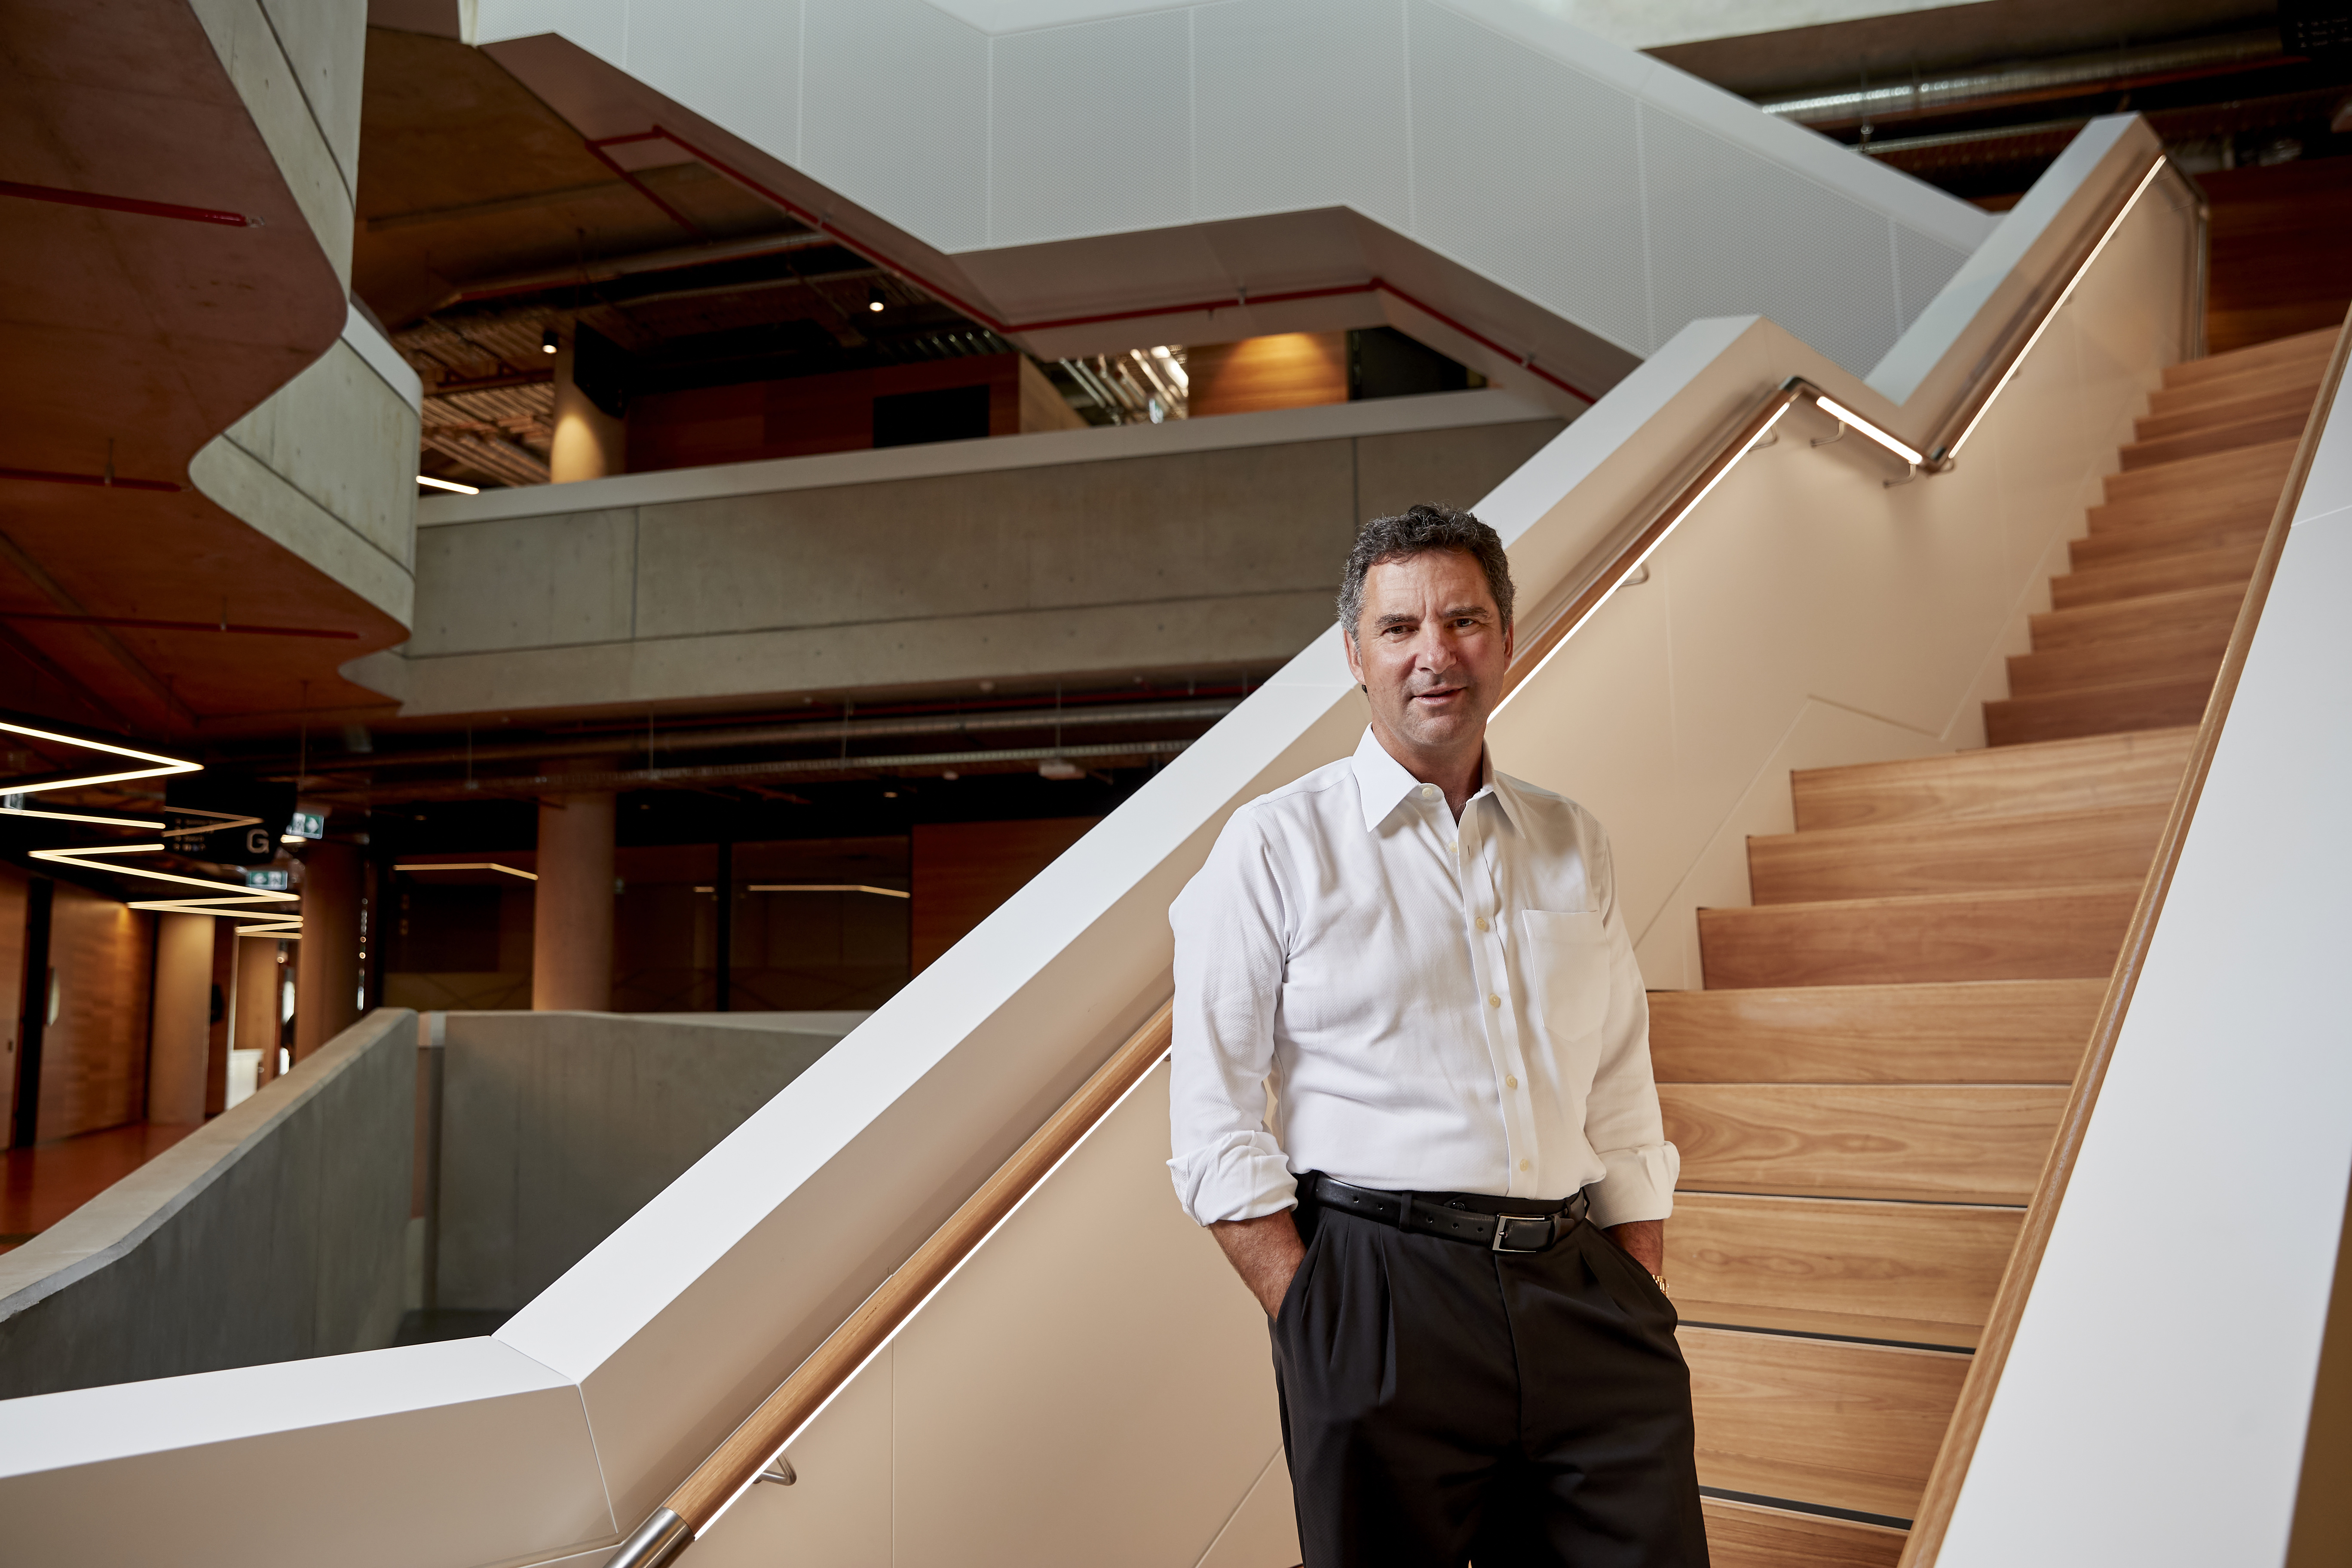 CSIRO Chief Executive, Larry Marshall standing in front of a staircase